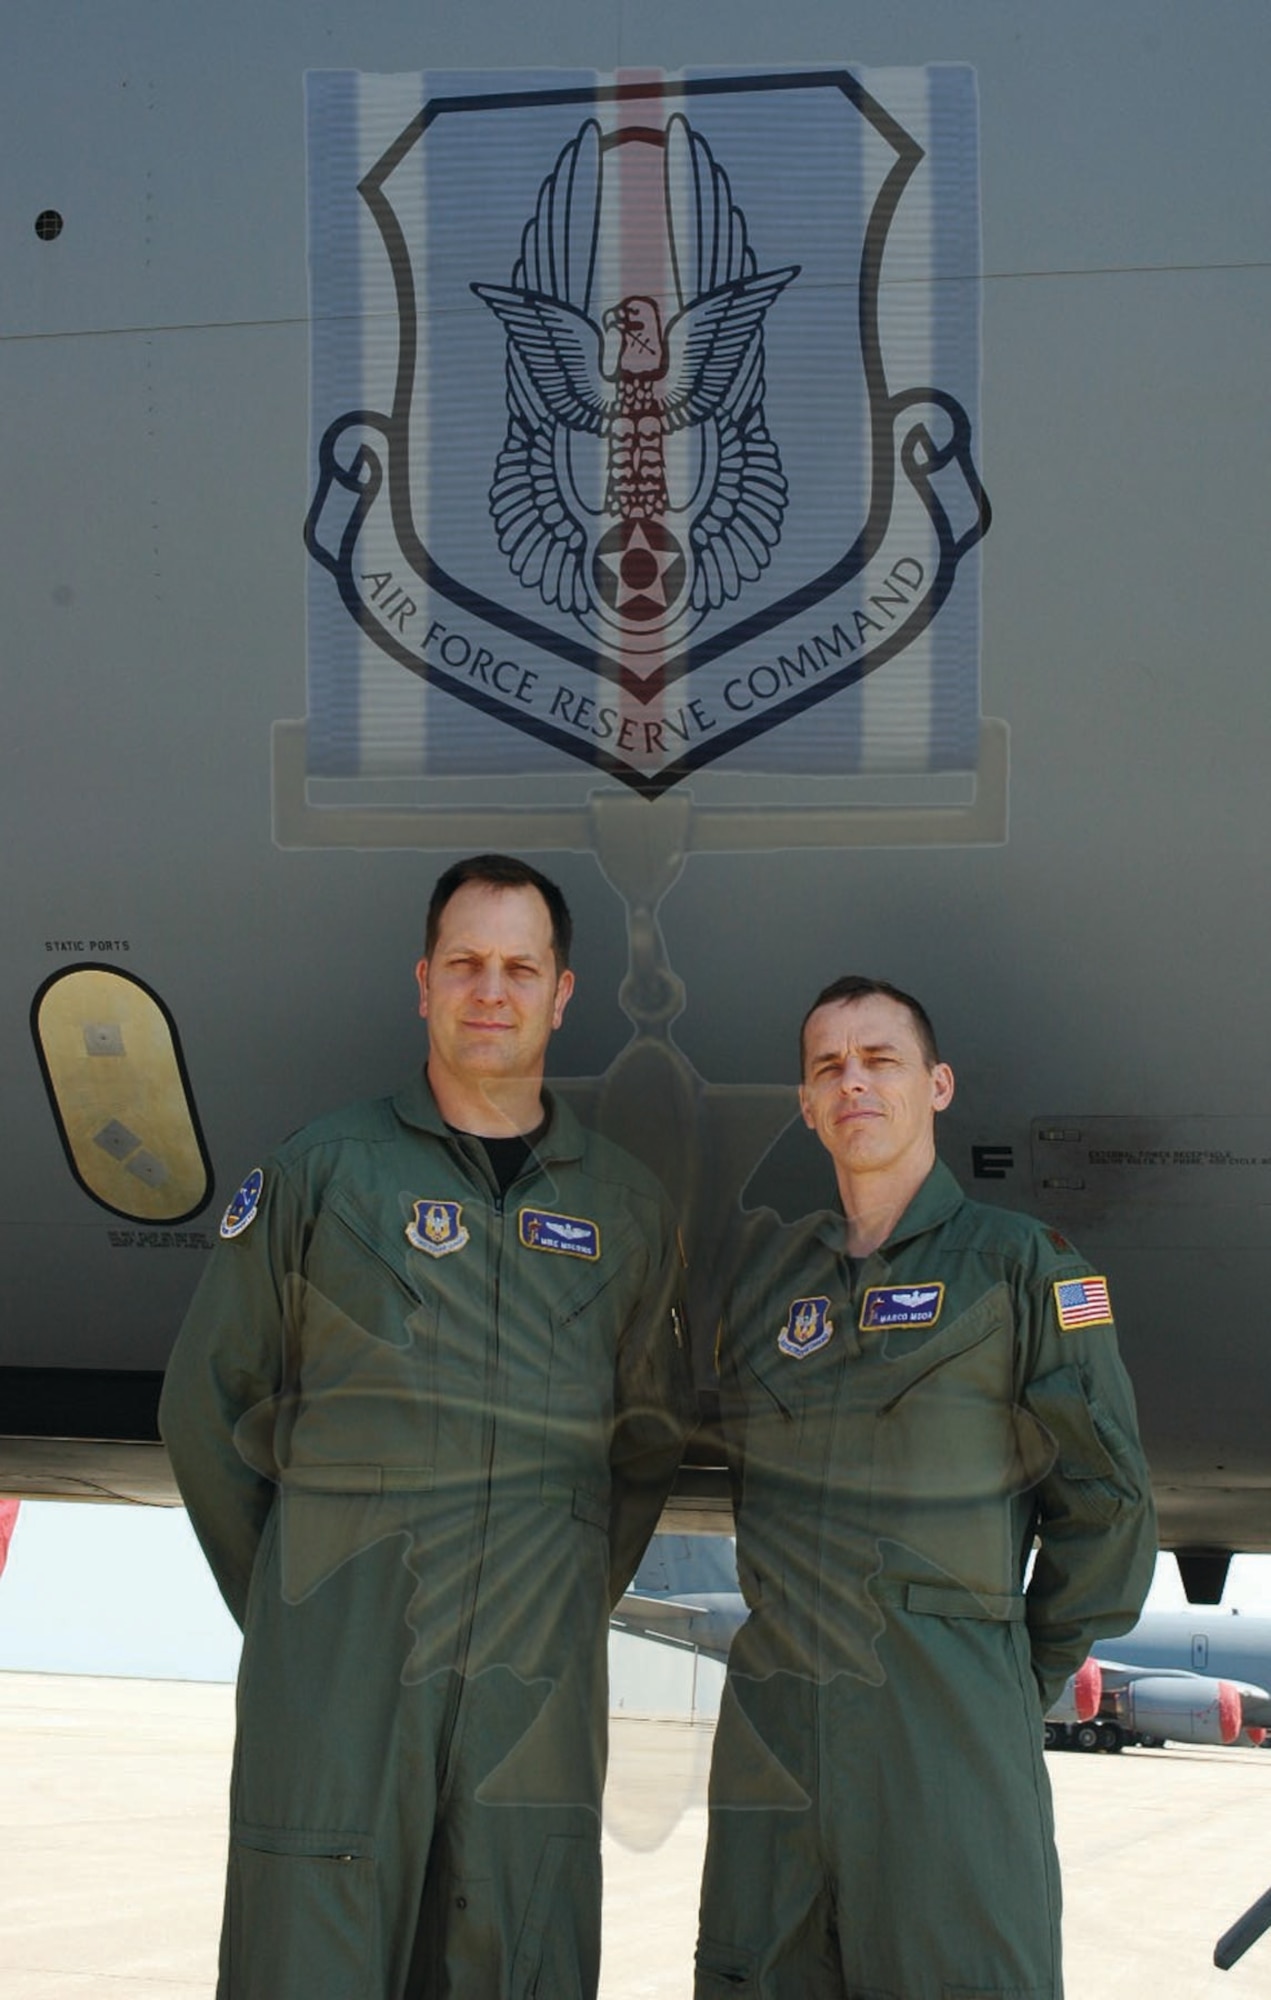 Majors Michael Moeding and Marco Moor were awarded the Distinguished Flying Cross for their actions in support of Operation Enduring Freedom. The Majors along with an active duty boom operator, Staff Sgt. Christopher Murphy recovered the KC-135R Stratotanker while flying a refueling mission over Southwest Asia. Sergeant Murphy received an Air Medal for his actions.